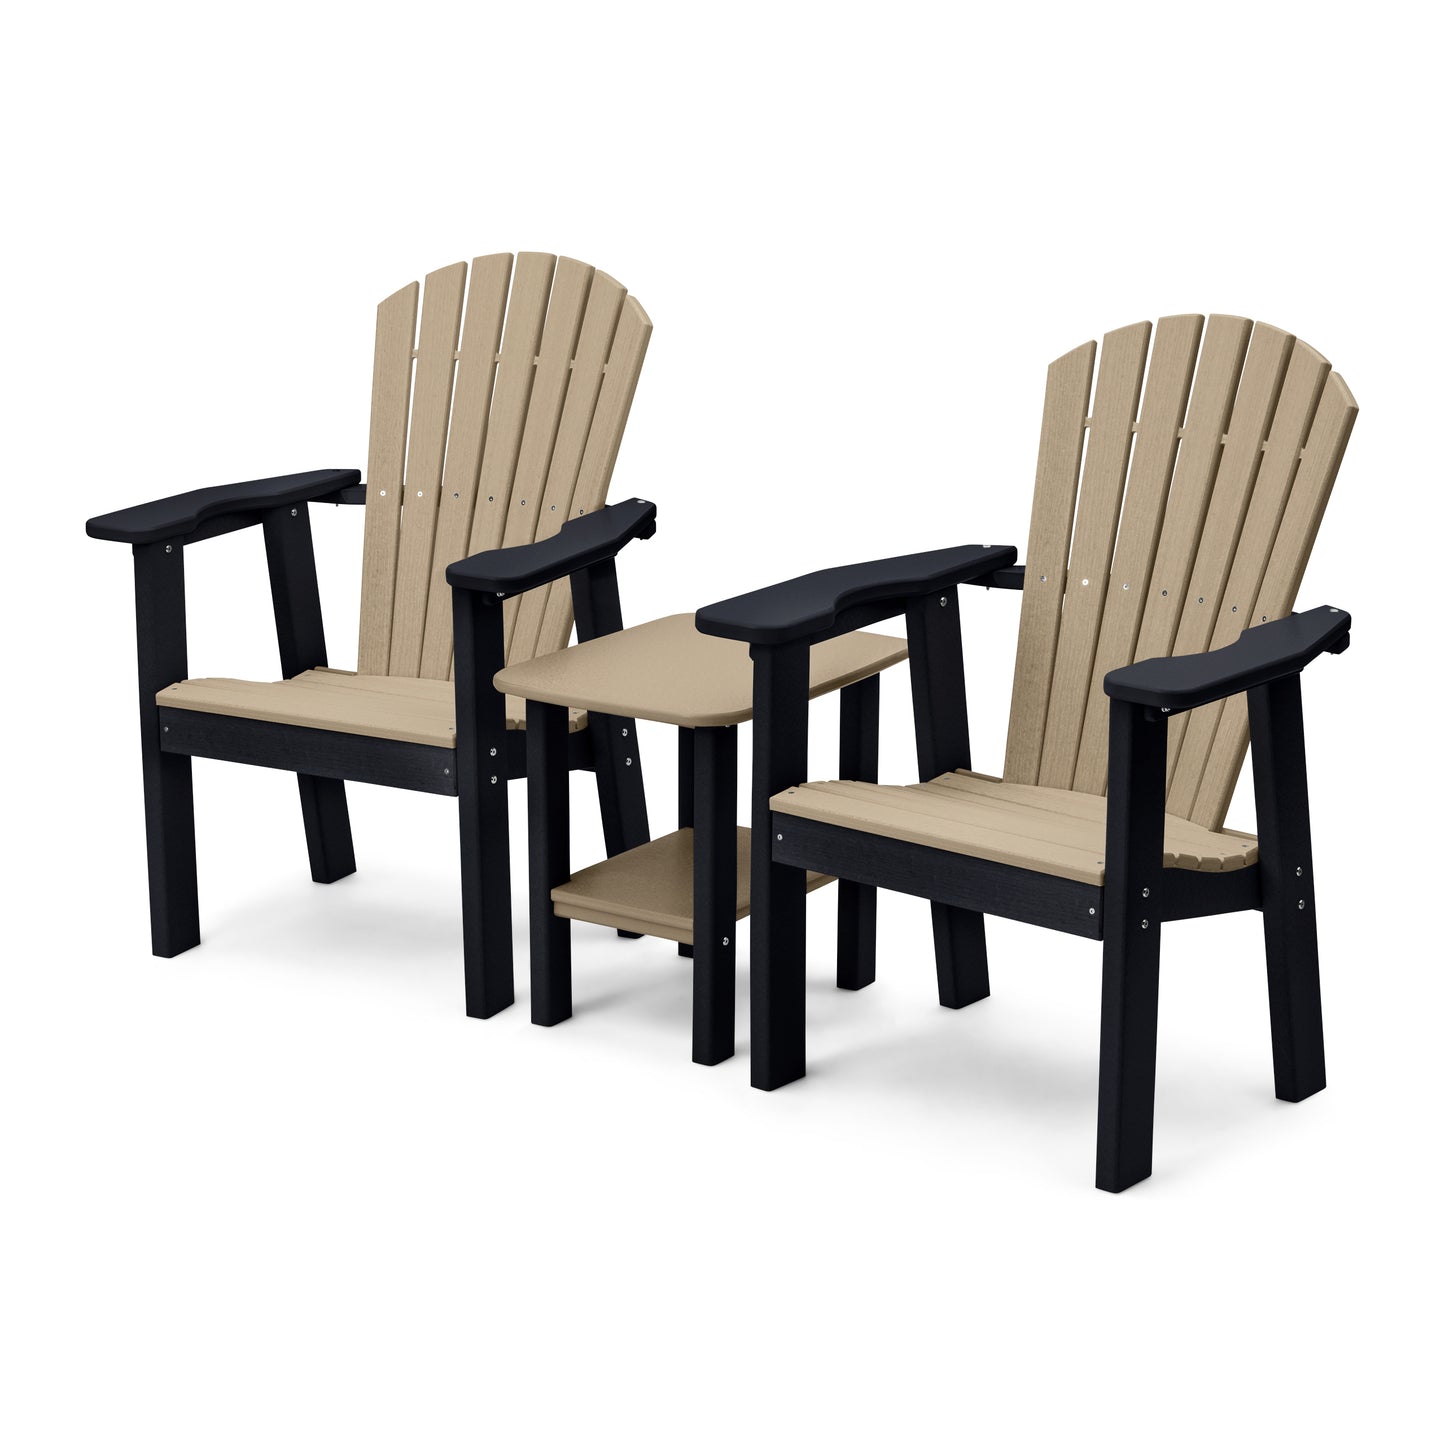 Perfect Choice Recycled Plastic Classic Upright Adirondack Chair Set - LEAD TIME TO SHIP 4 WEEKS OR LESS